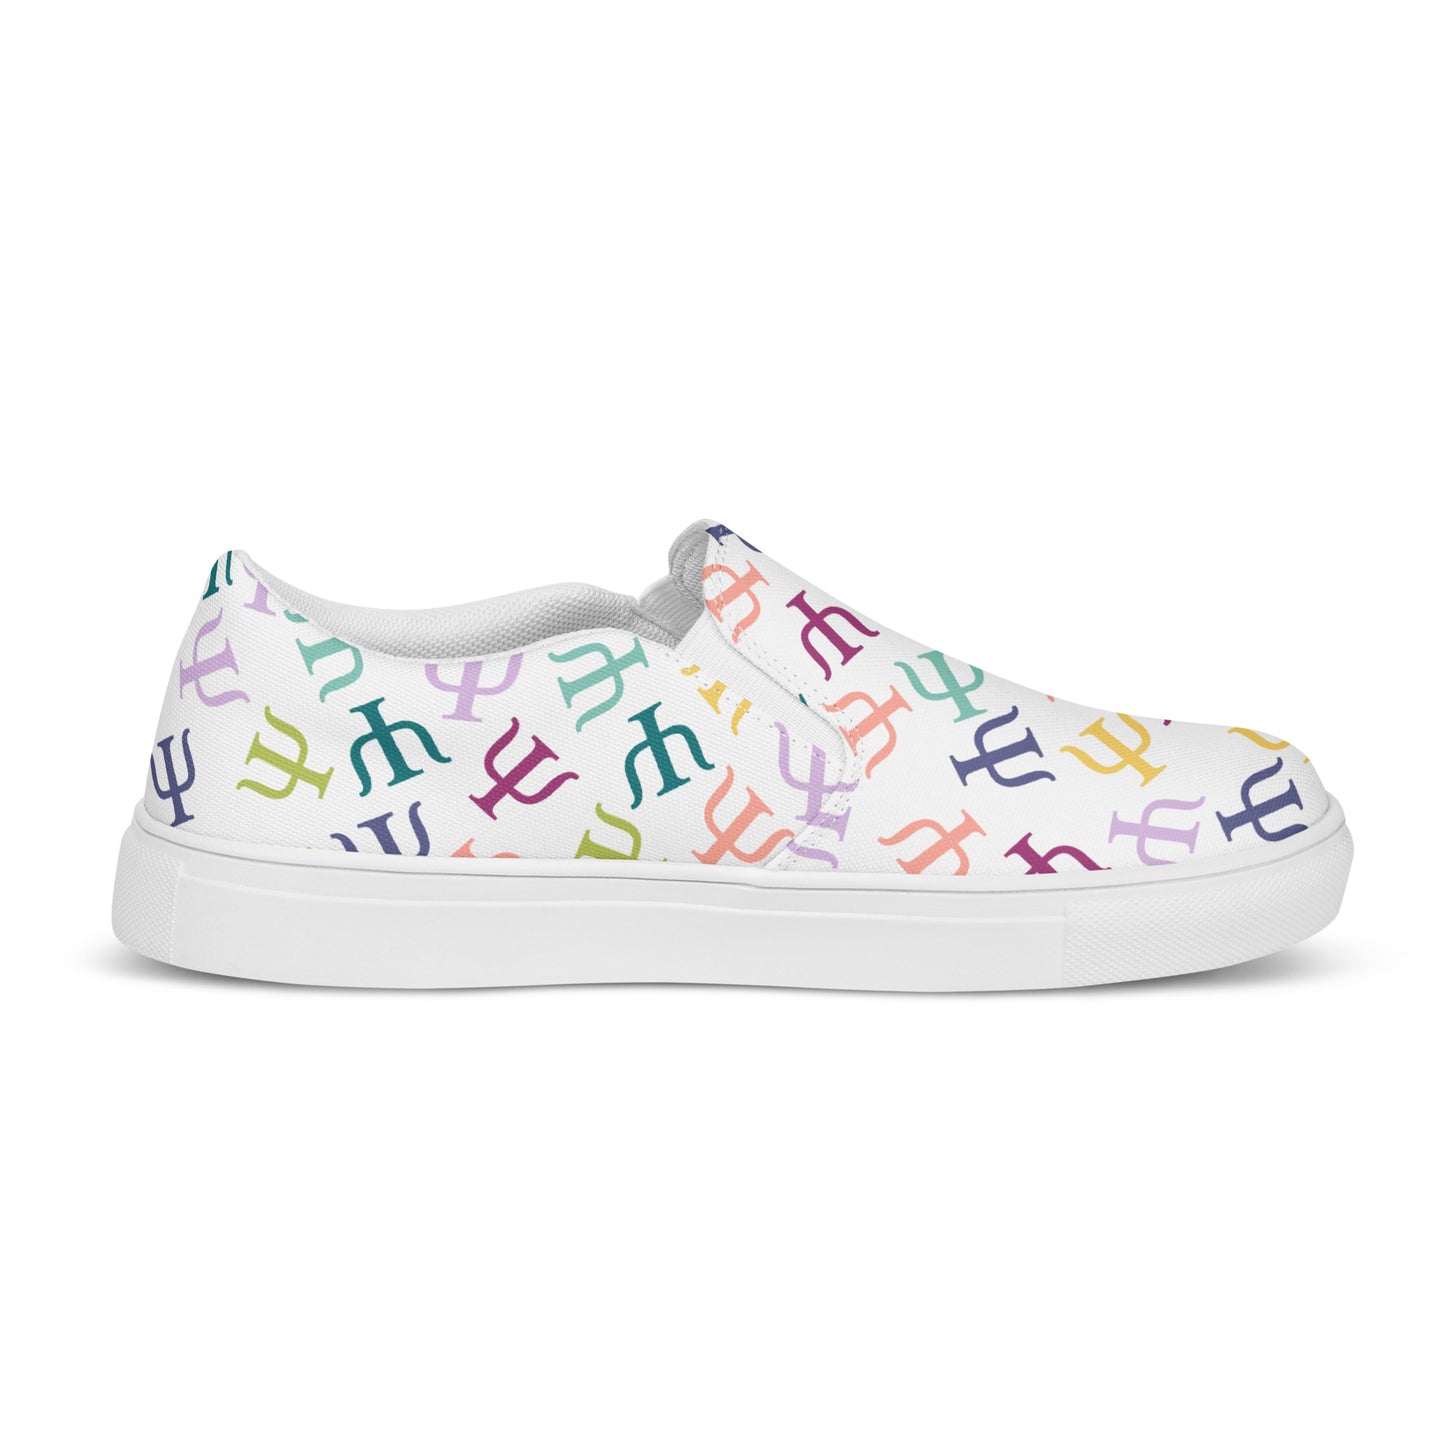 Muted Rainbow Psych Symbol Slip-on Canvas Shoes (Women's Sizes)